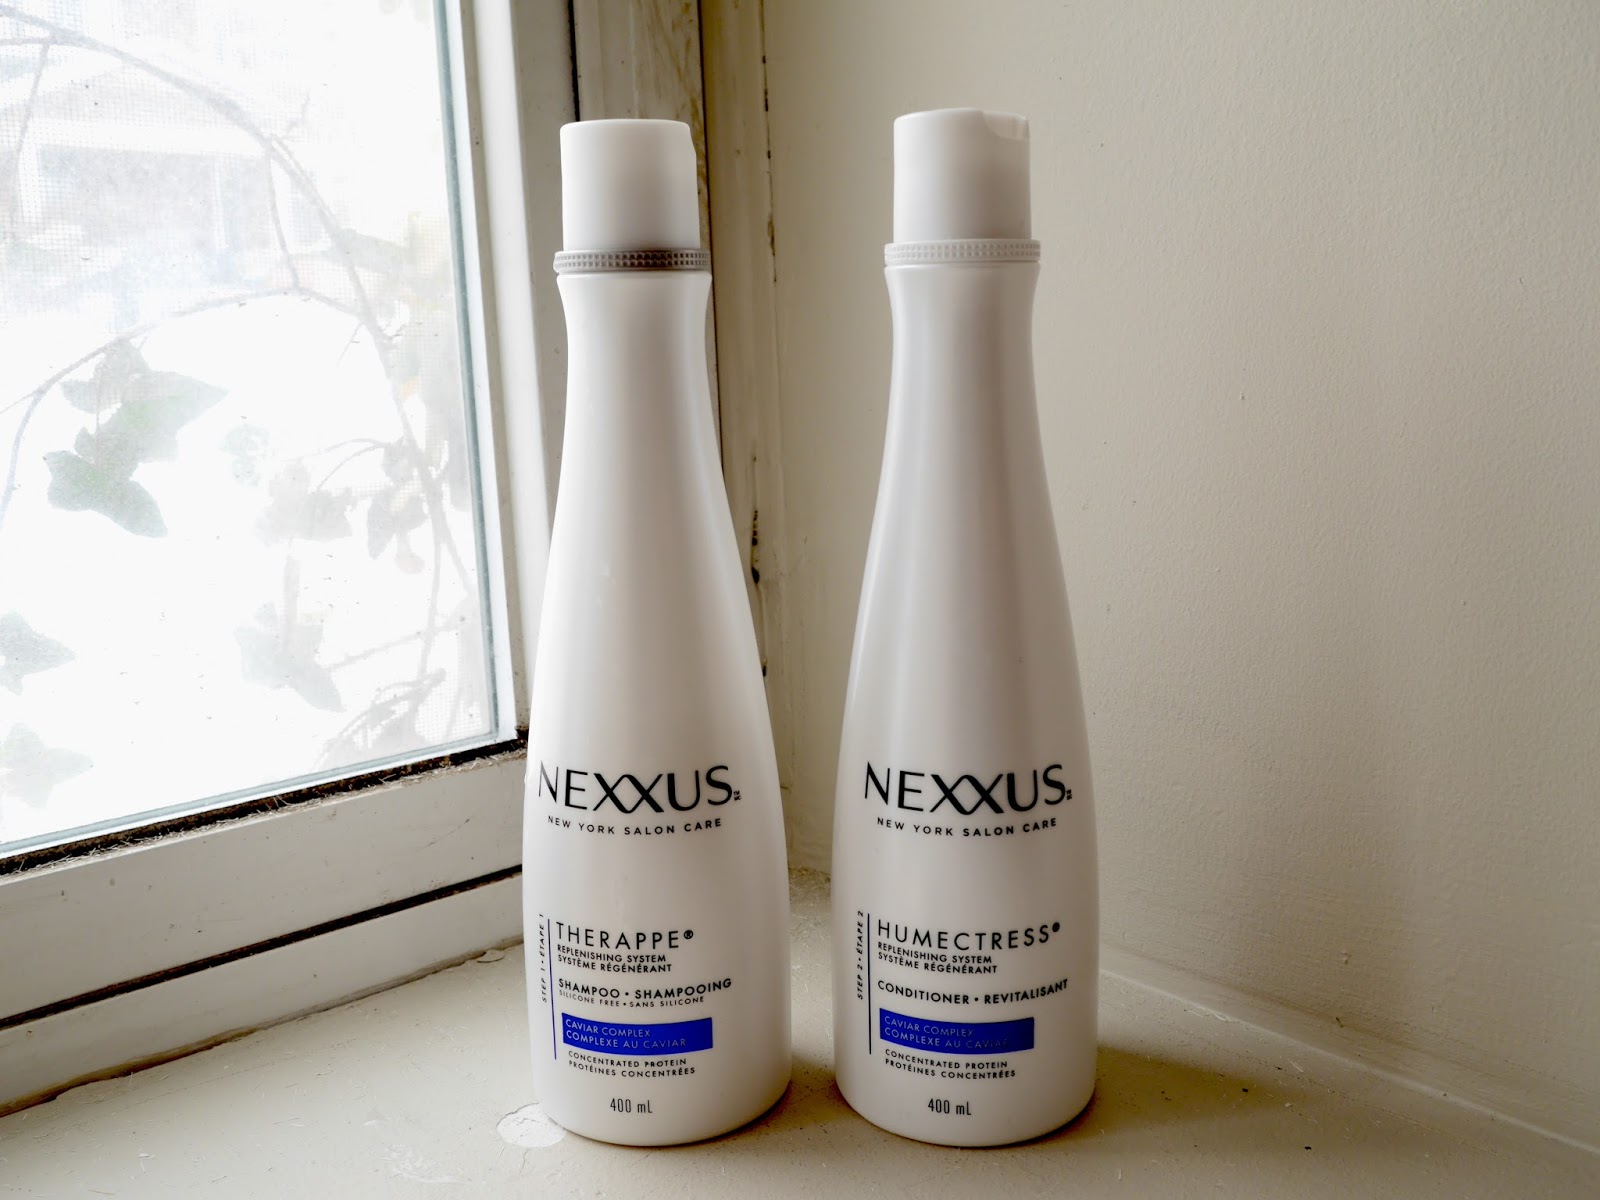 Nexus Caviar Complex Therappe and Humectress shampoo conditioner review